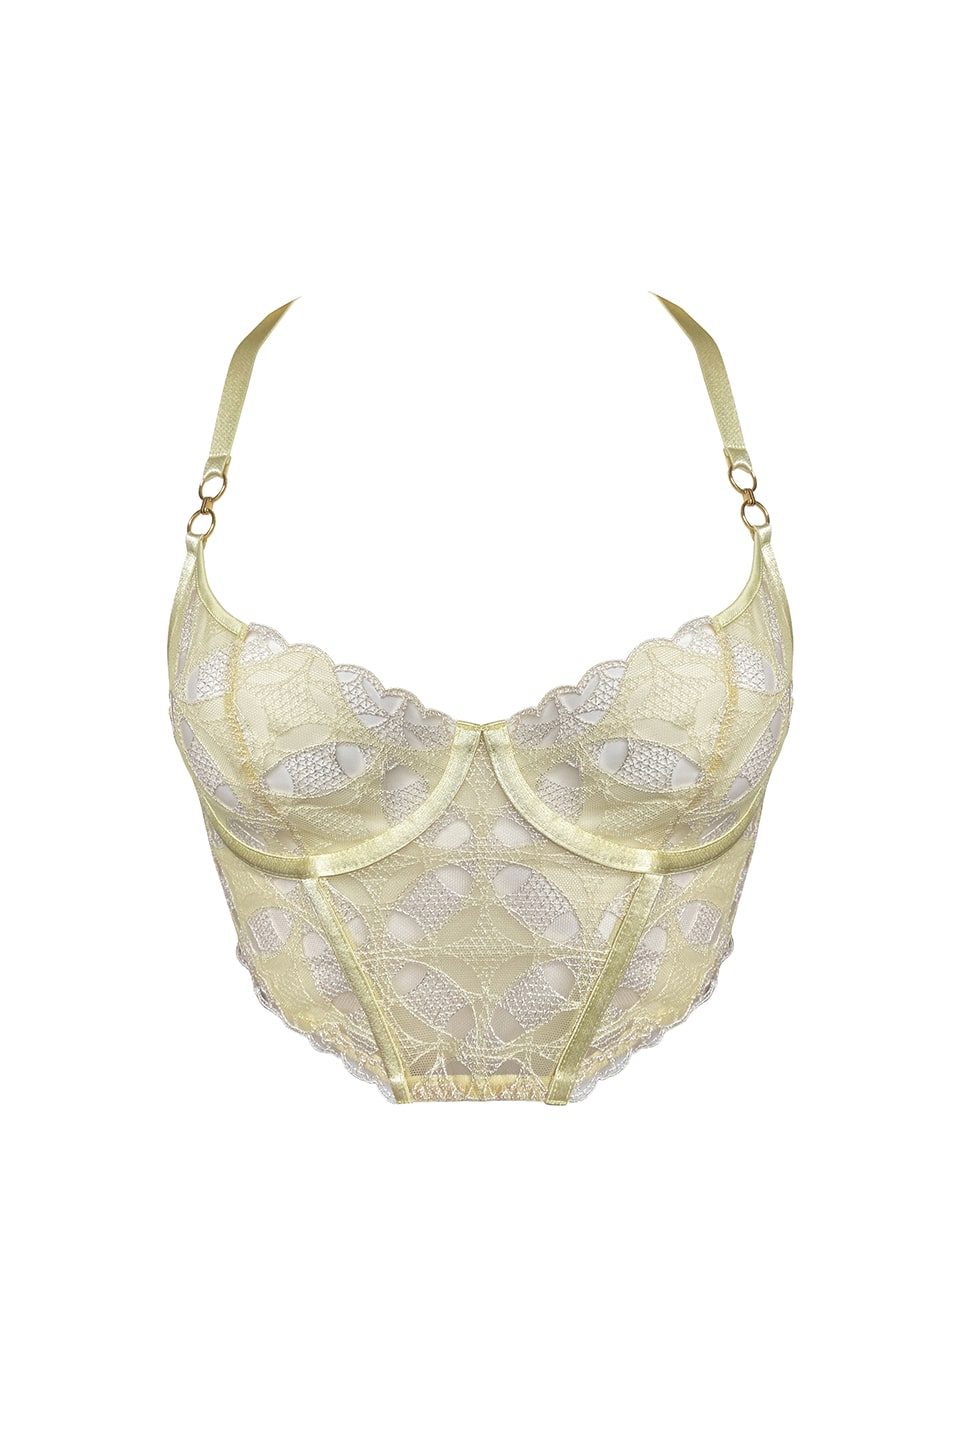 Shop online trendy Yellow Bras from Atelier Bordelle Fashion designer. Product gallery 1